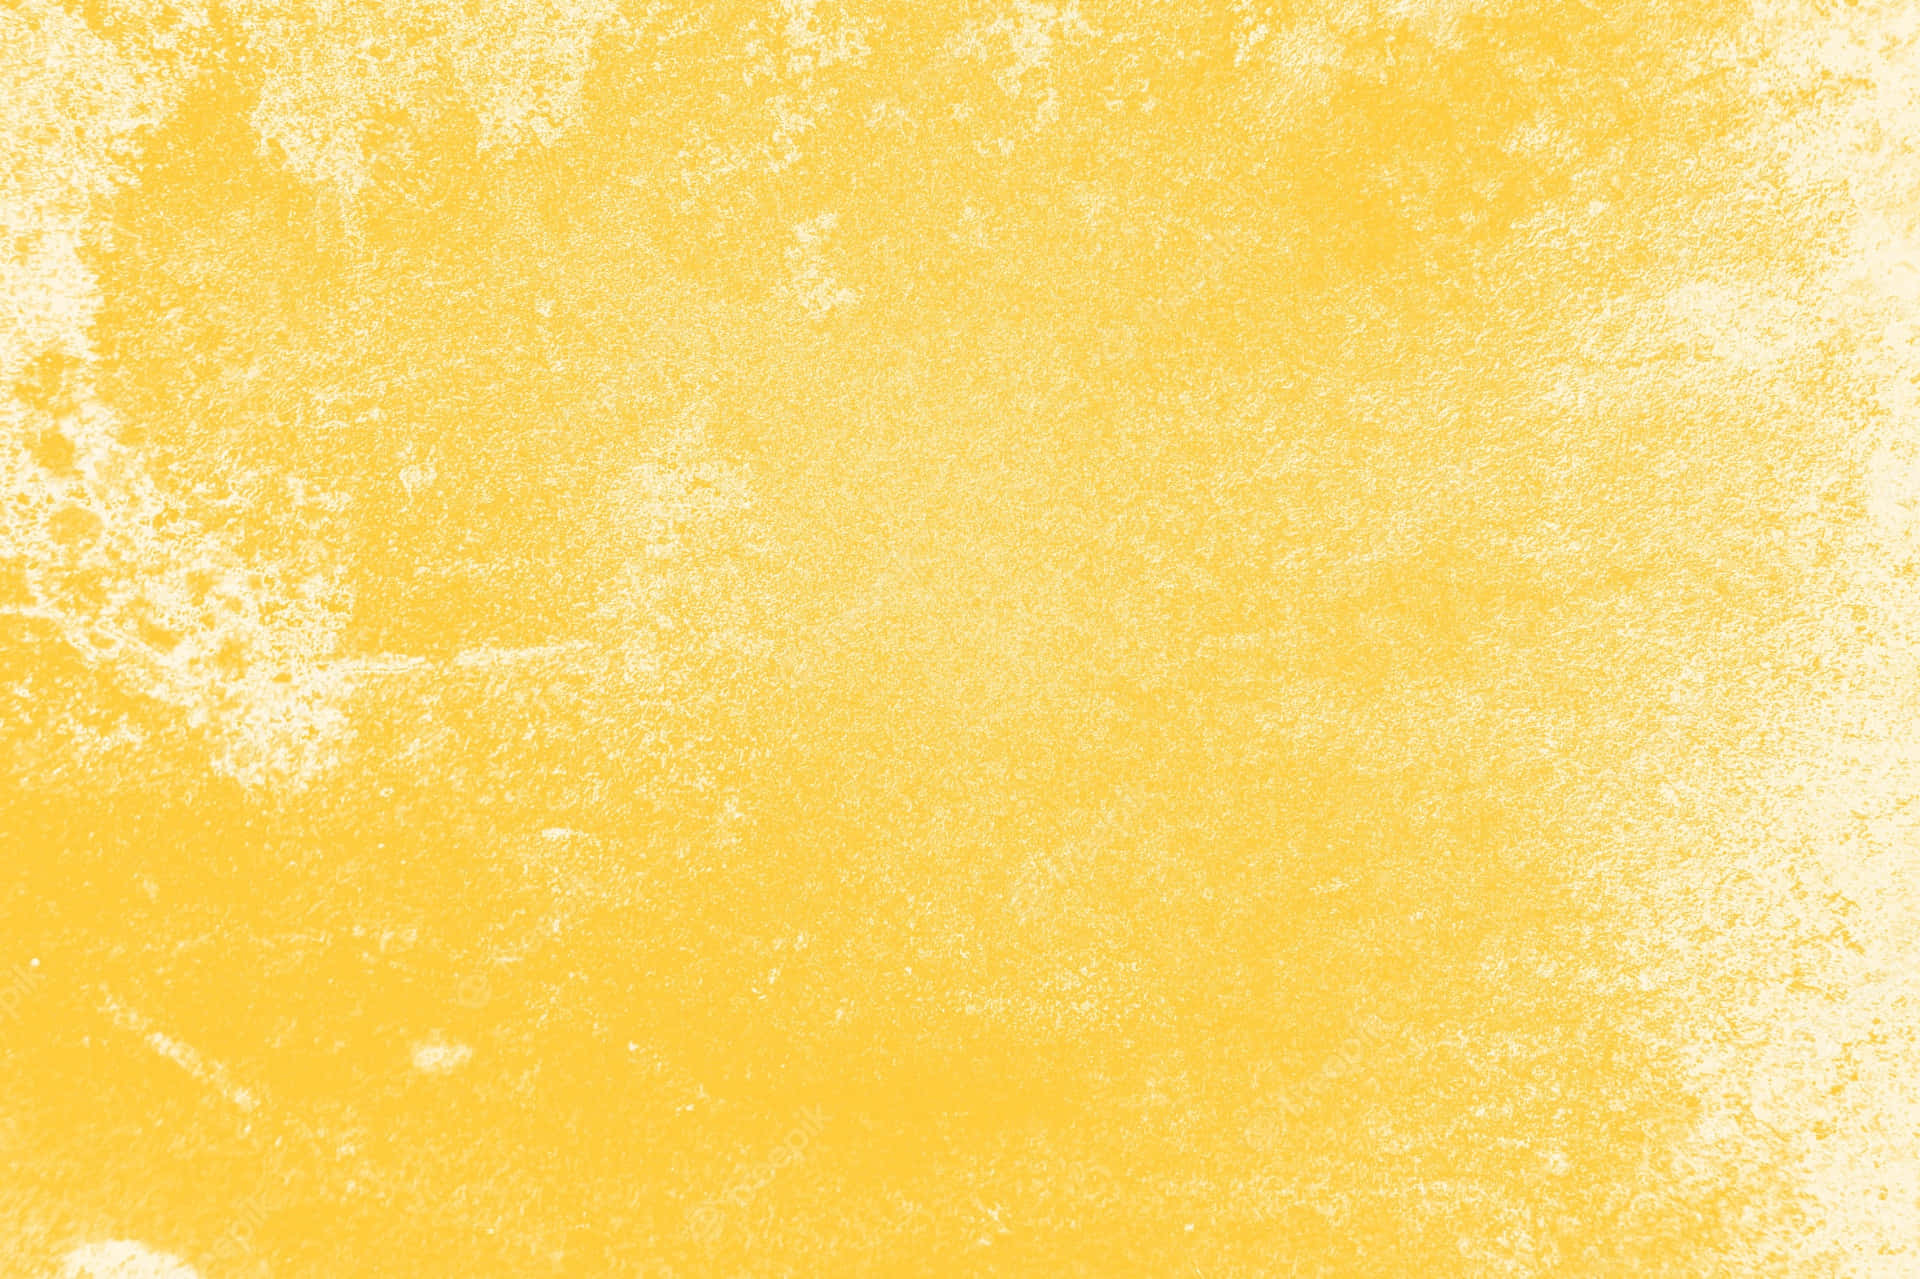 A bright yellow textured background with an interesting pattern